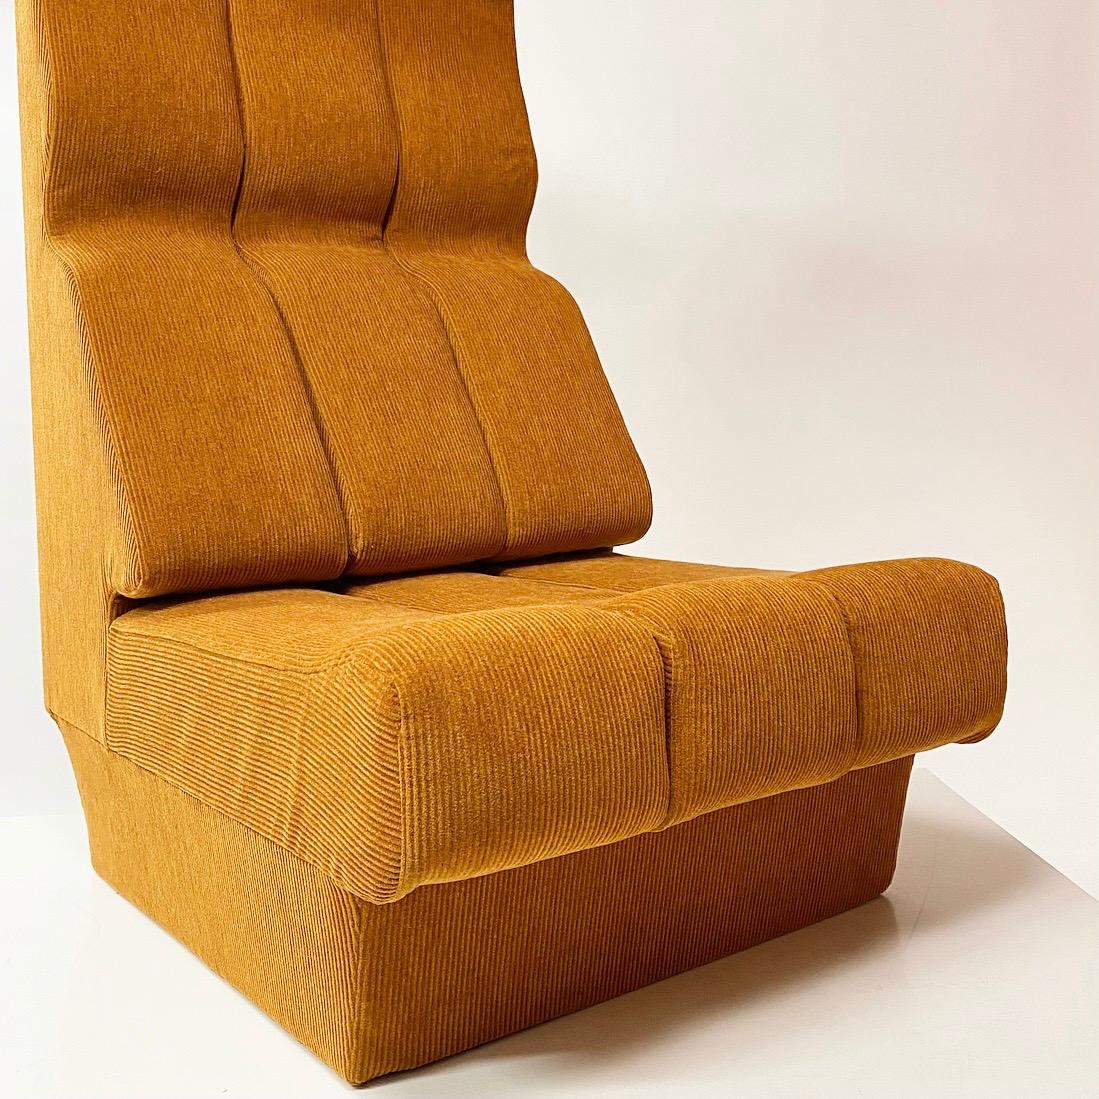 Interlübke Highback Space Age Seat with New Upholstery, Germany, 1970 For Sale 3